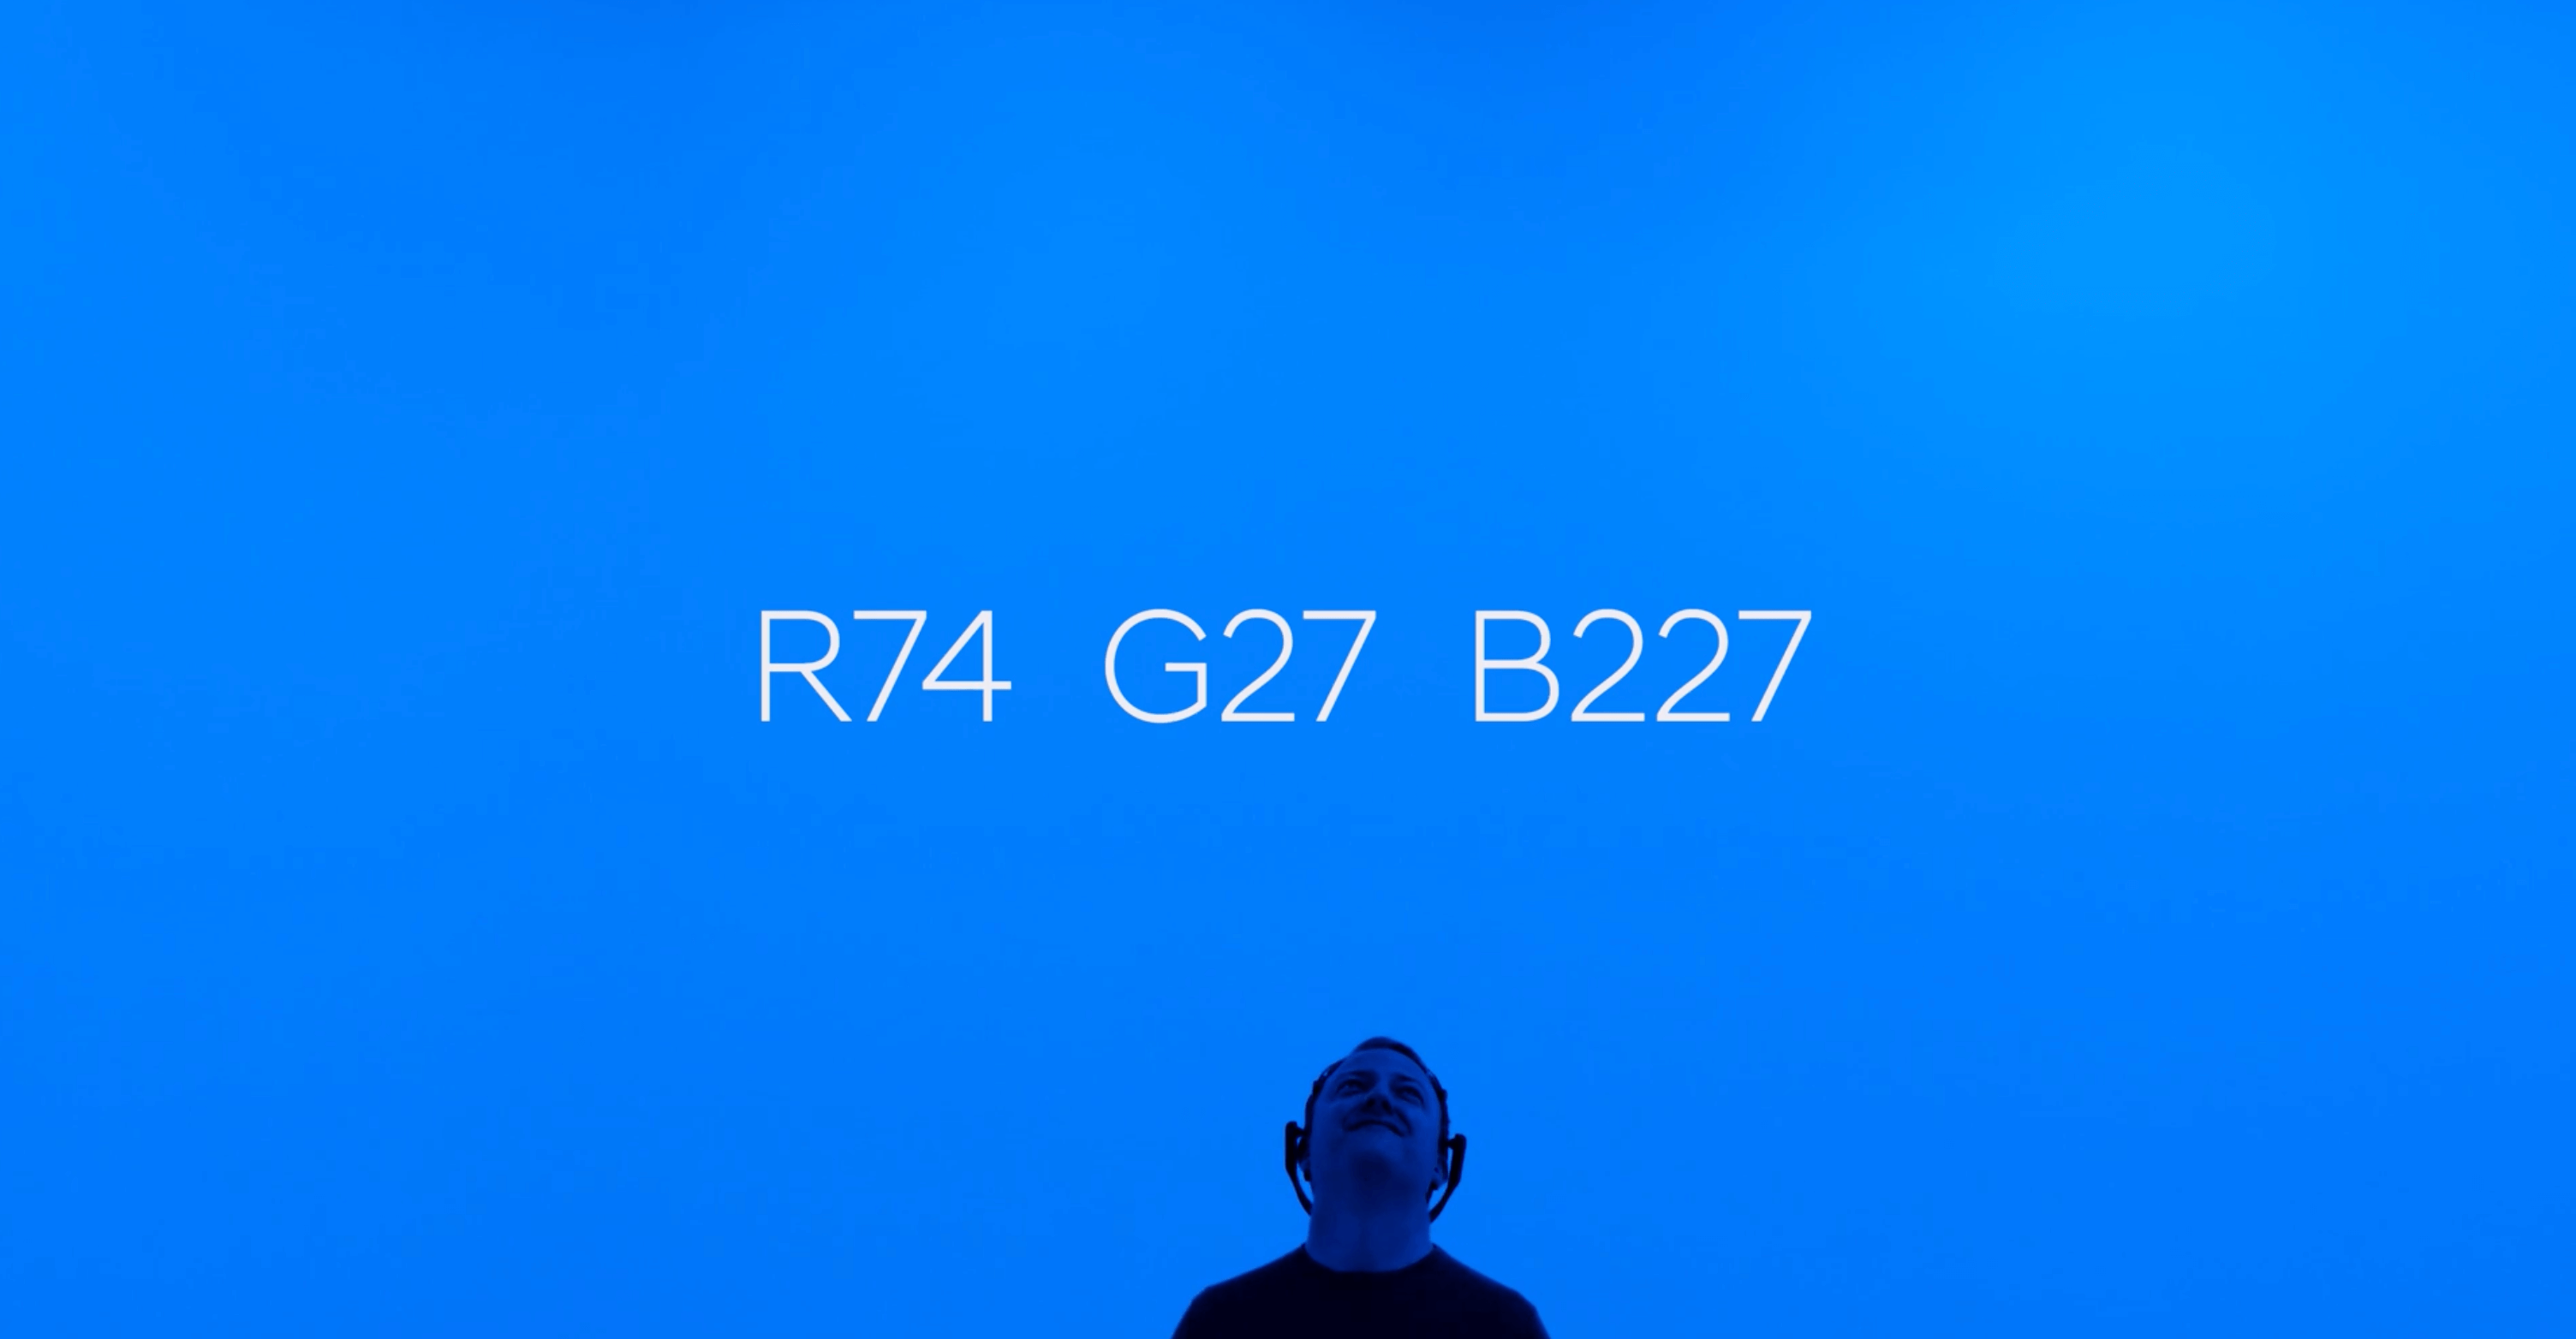 man looking up at blue background